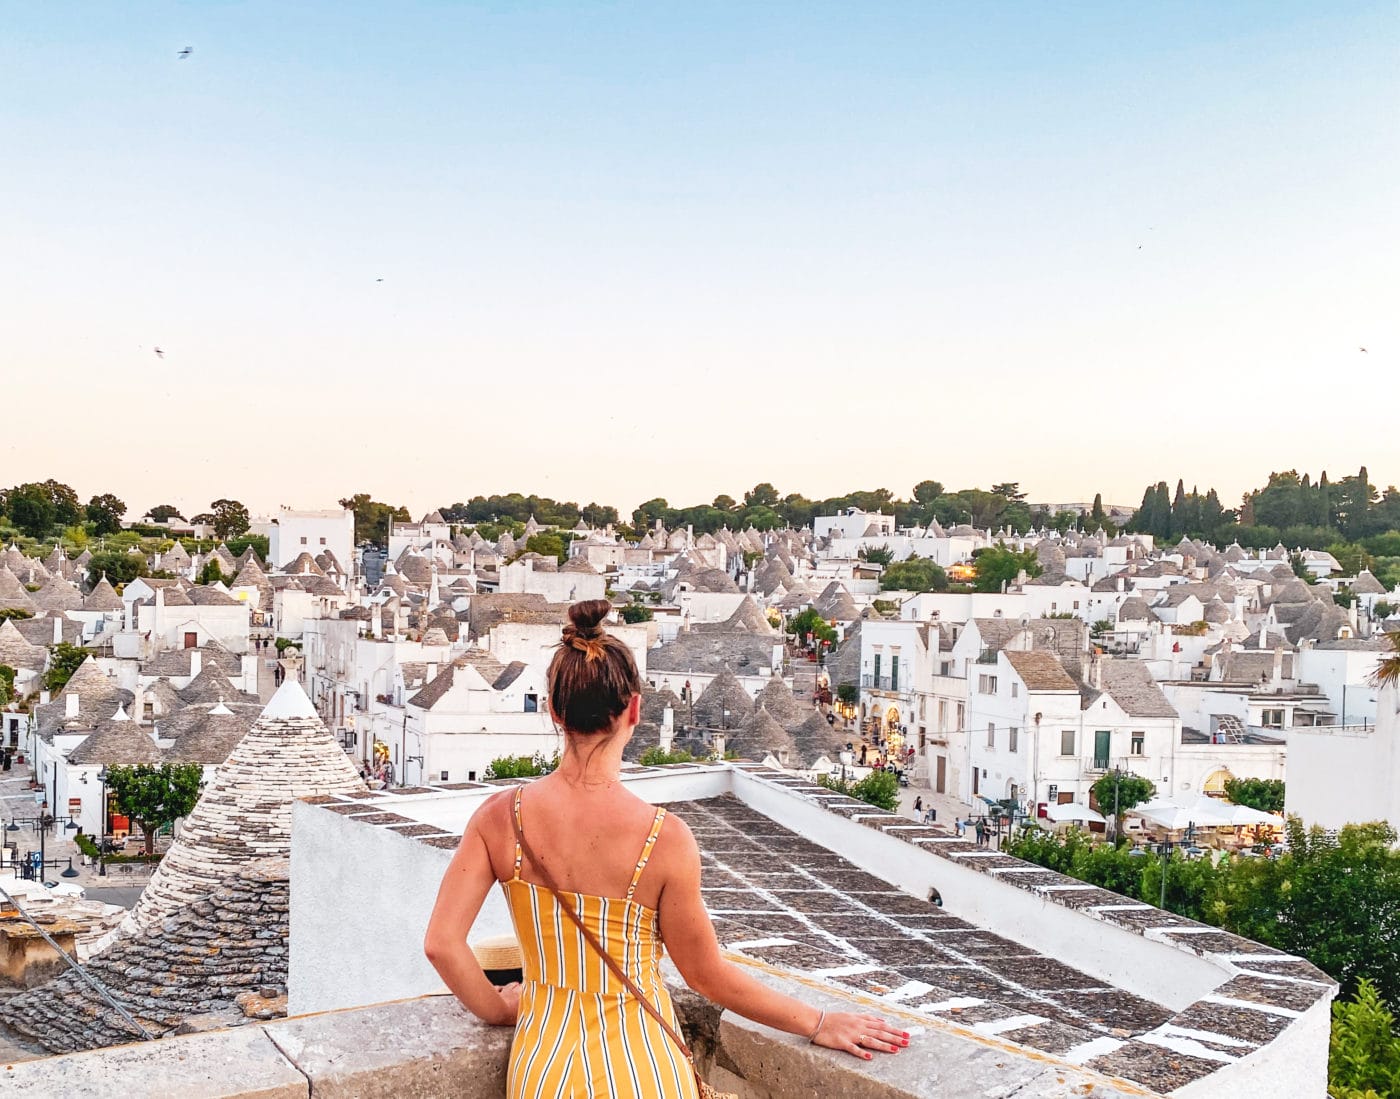 woman in yellow dress and bun looking out from a terrace onto the many trulli below in Alberobello Puglia, Italy